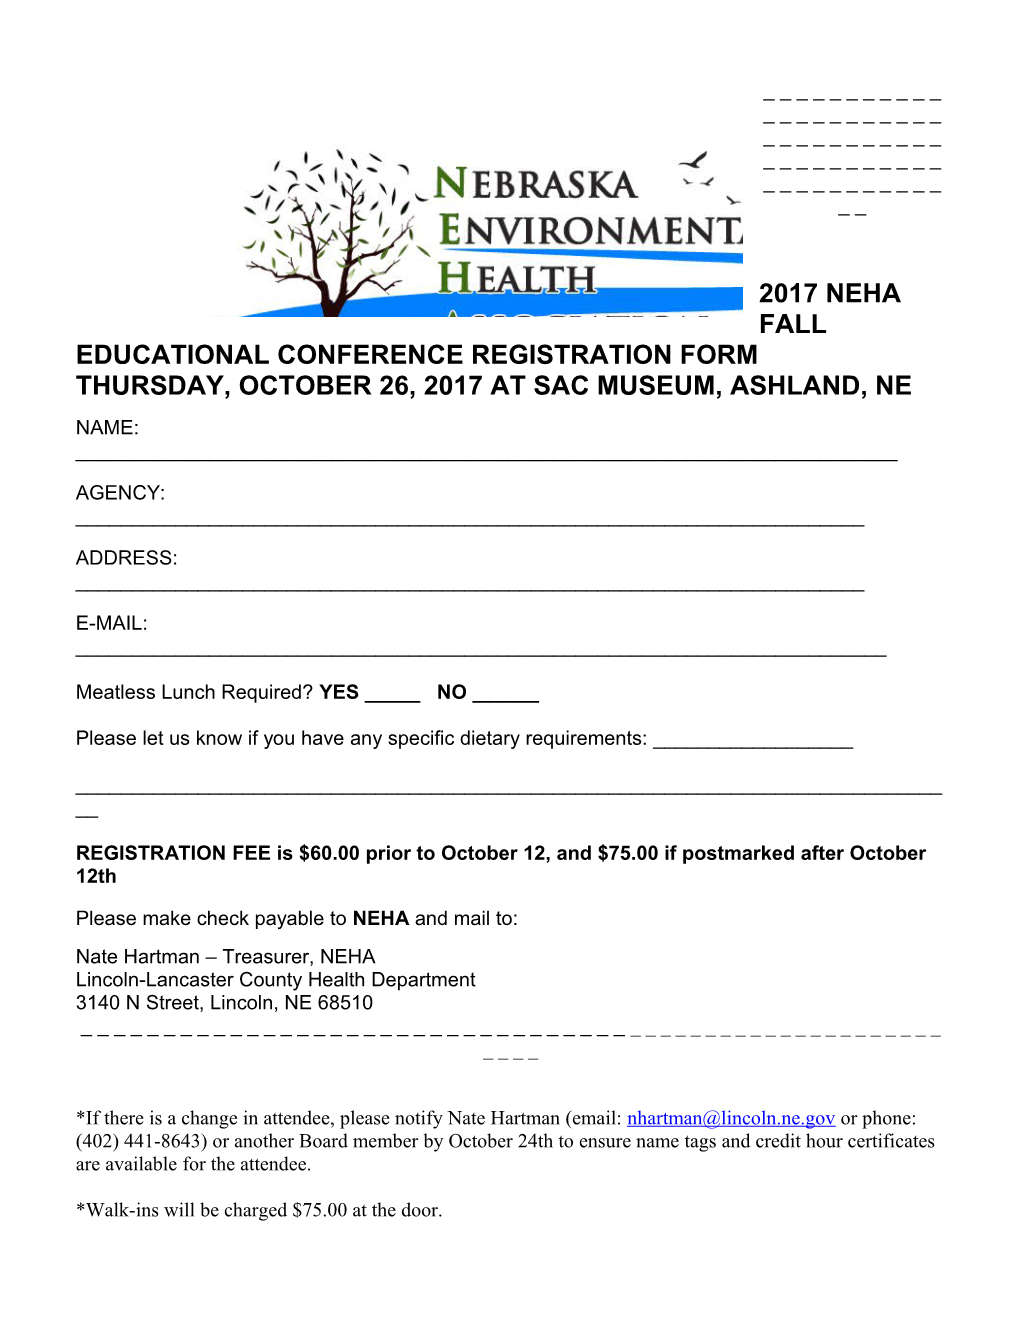 2017 Neha Fall Educational Conference Registration Form